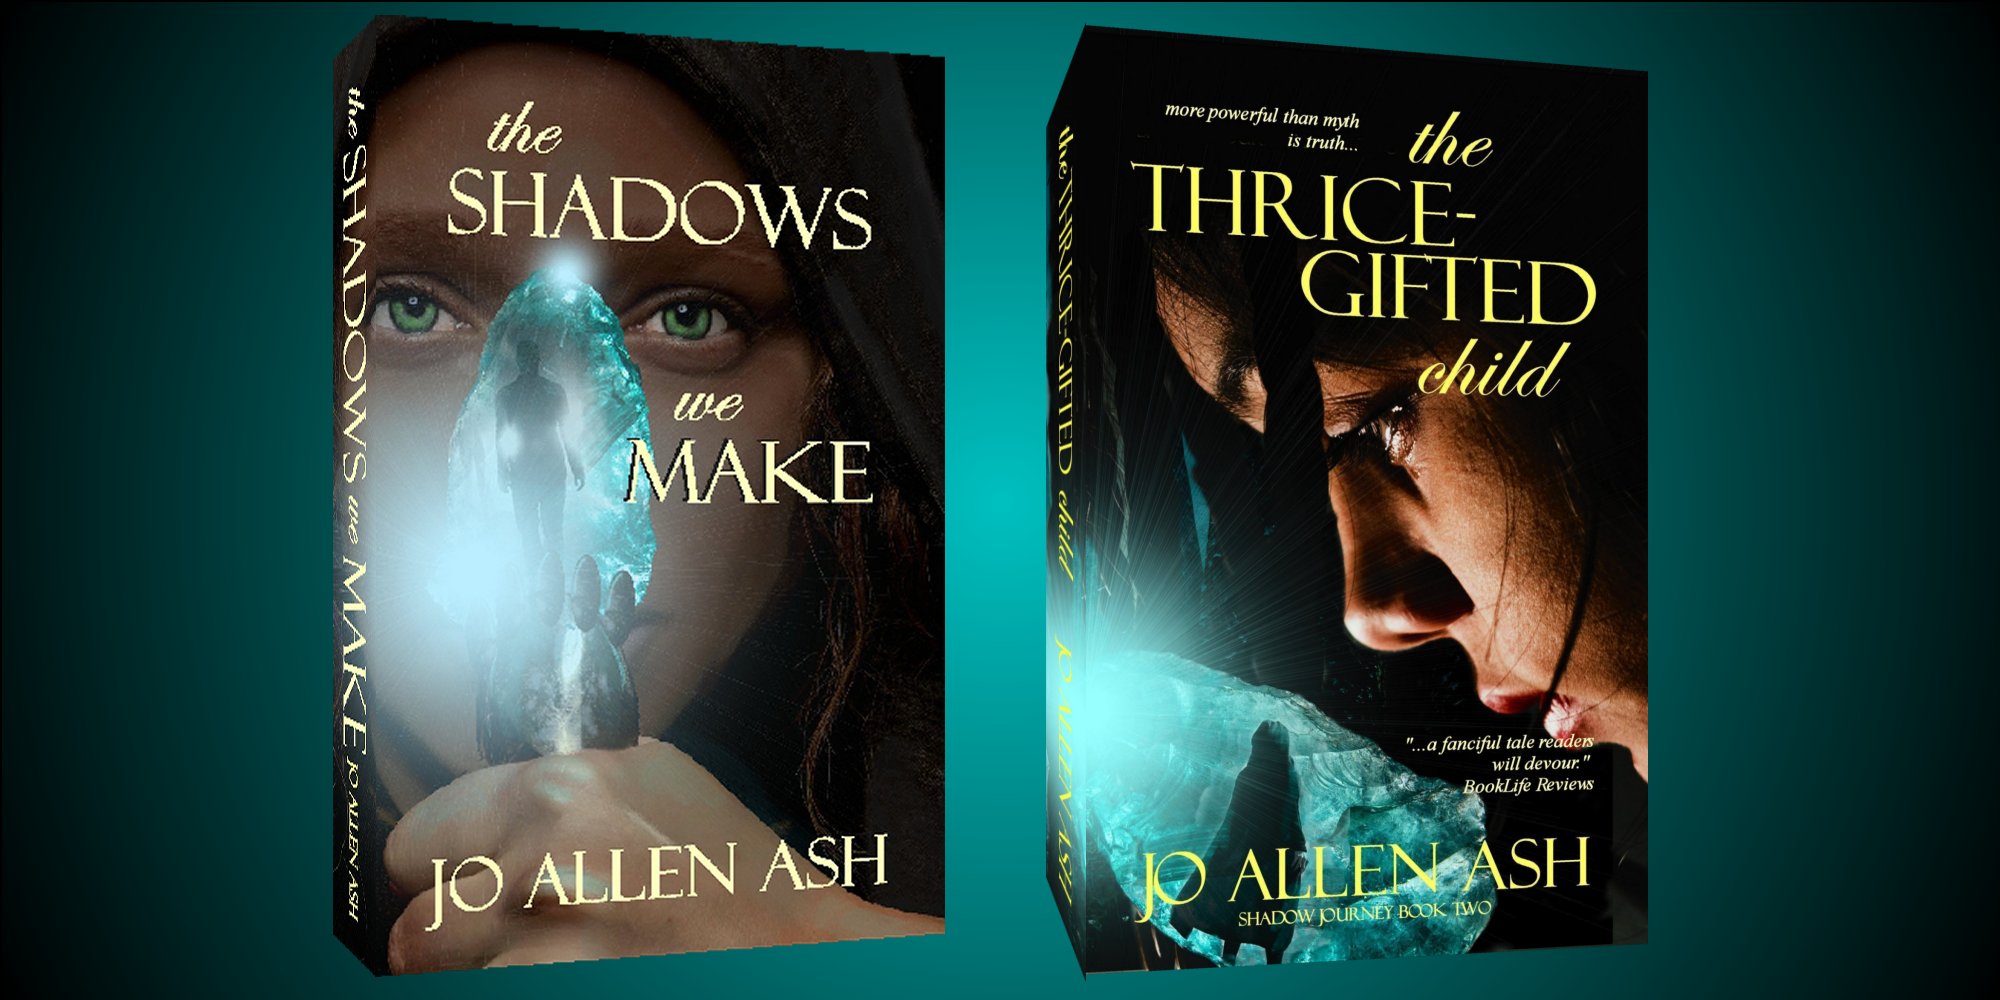 Spotlight on The Thrice-Gifted Child (Jo Allen Ash), Excerpt Plus Giveaway! ~US/CAN Only